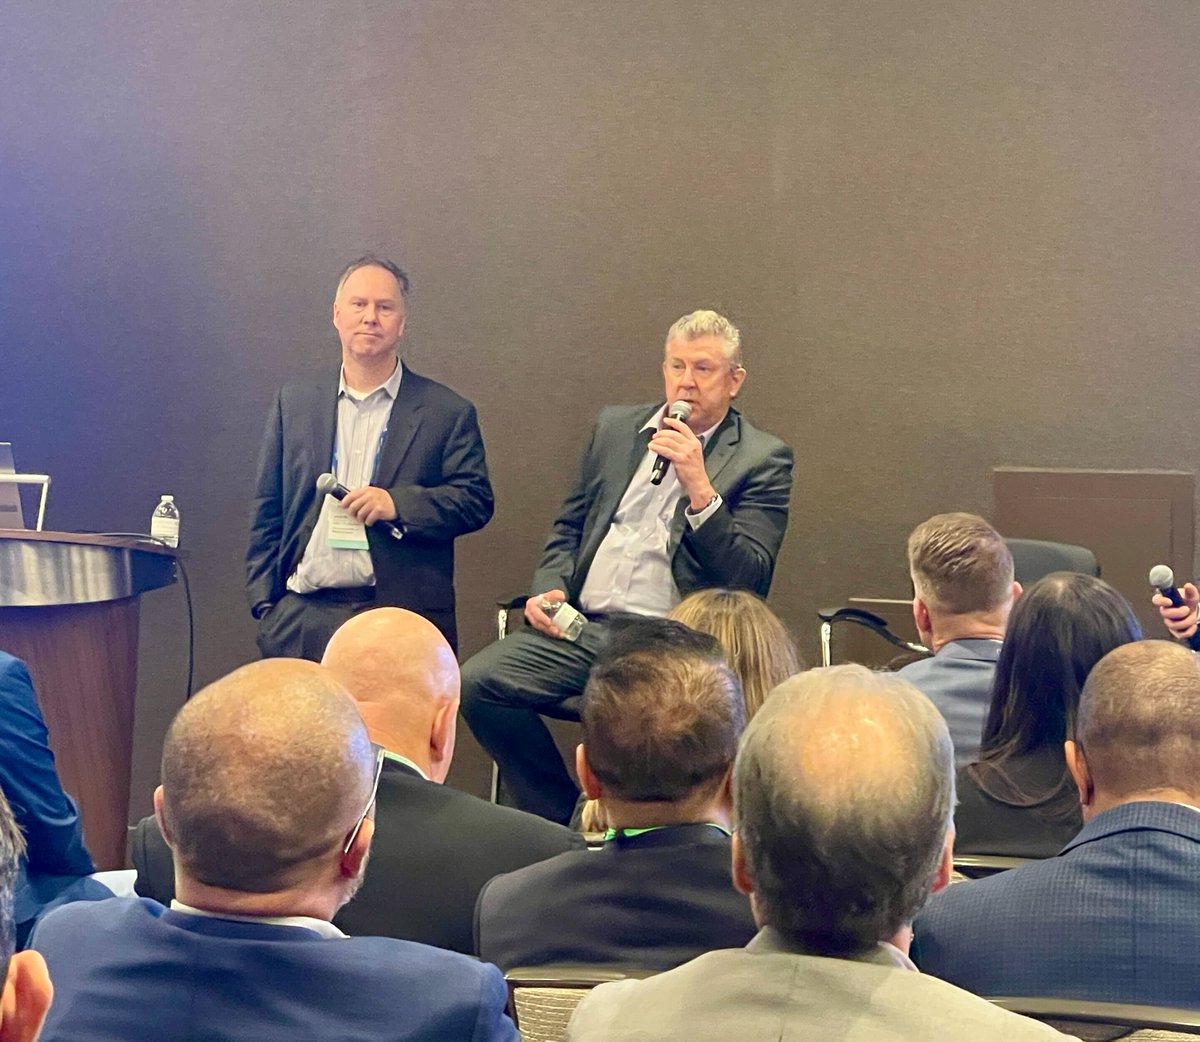 During a #NASCIO24 Midyear panel, @MassEOTSS CIO Jason Snyder and @WaTechGov CIO Kehoe discussed how their #GovIT agencies are testing #AI use cases, including #IdentityManagement and #translation.